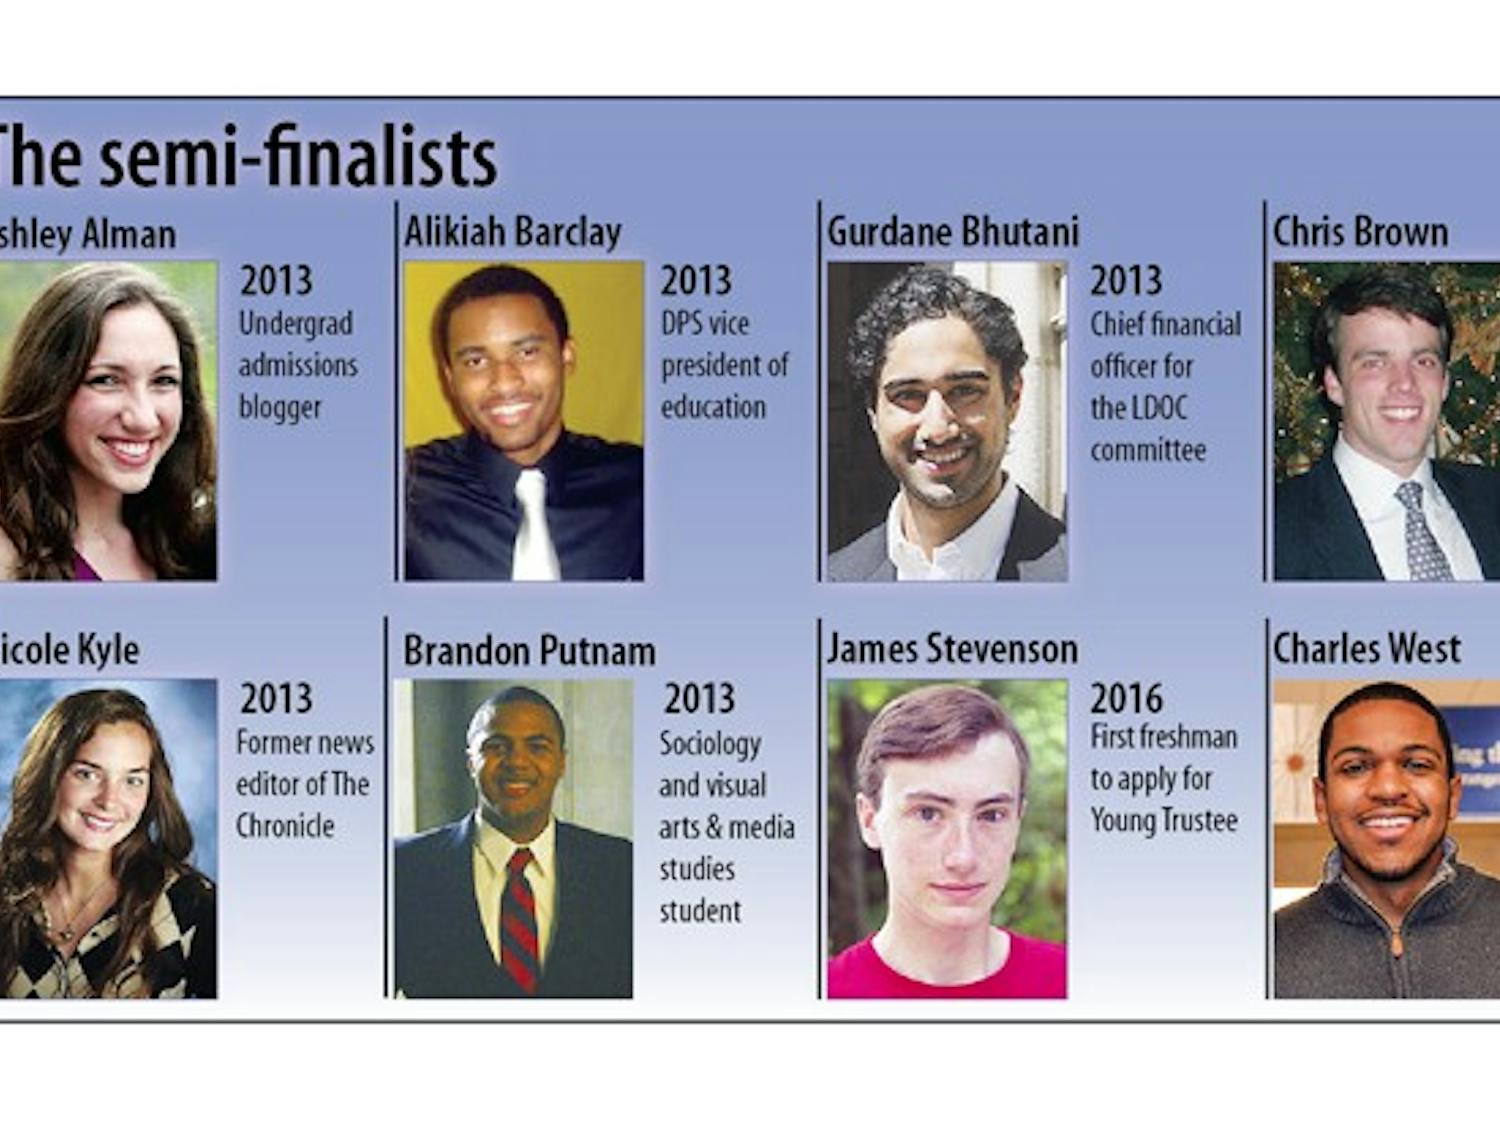 This year, each of the eight Young Trustee applicants have moved on to the semifinalist round, including one freshman.  After an interview process, the finalists will be announced. The student body will vote on the finalists.